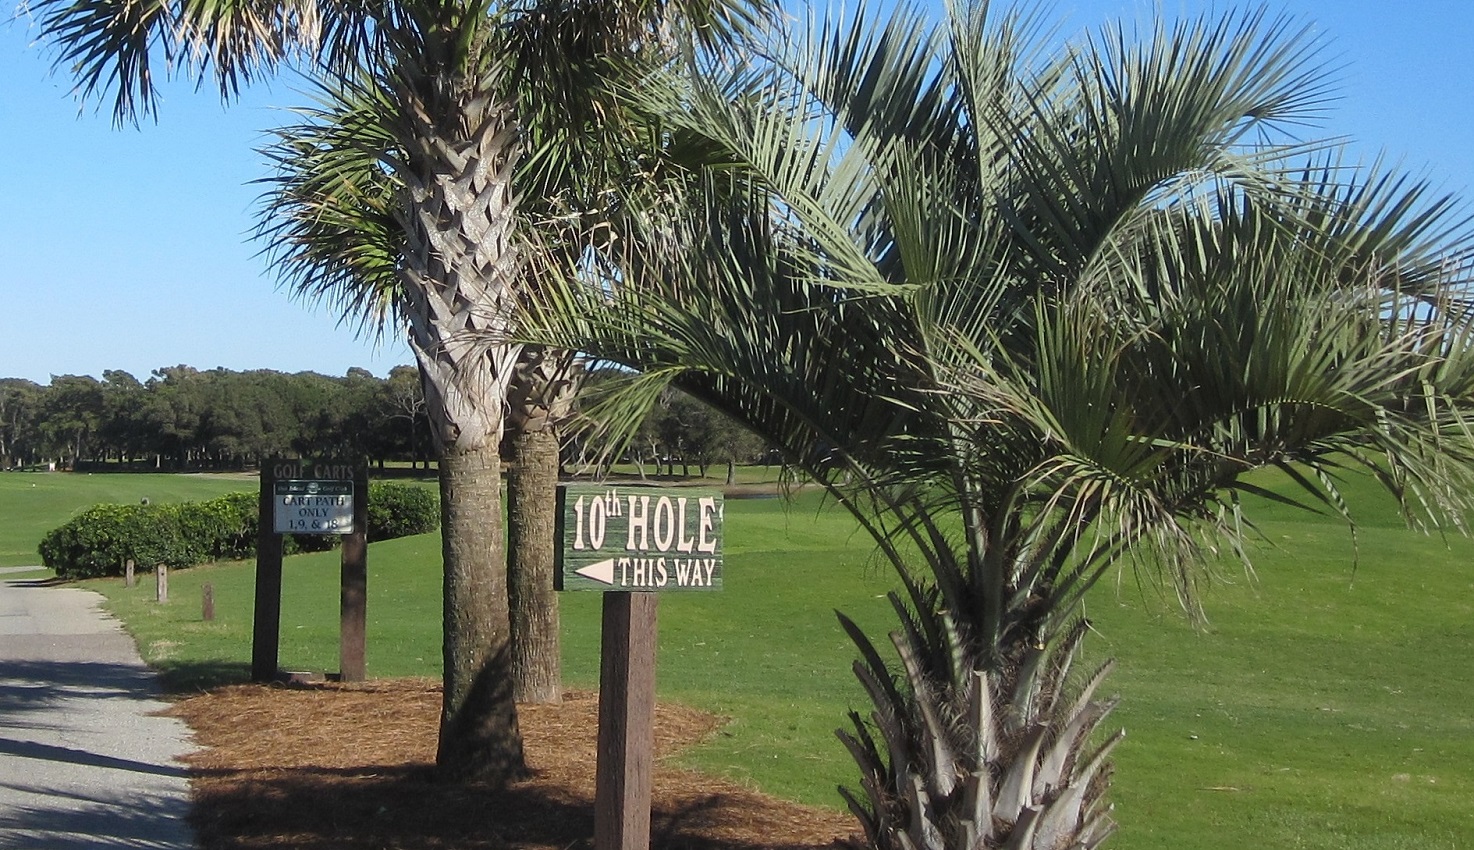 golf course at Oak Island and Caswell Beach NC